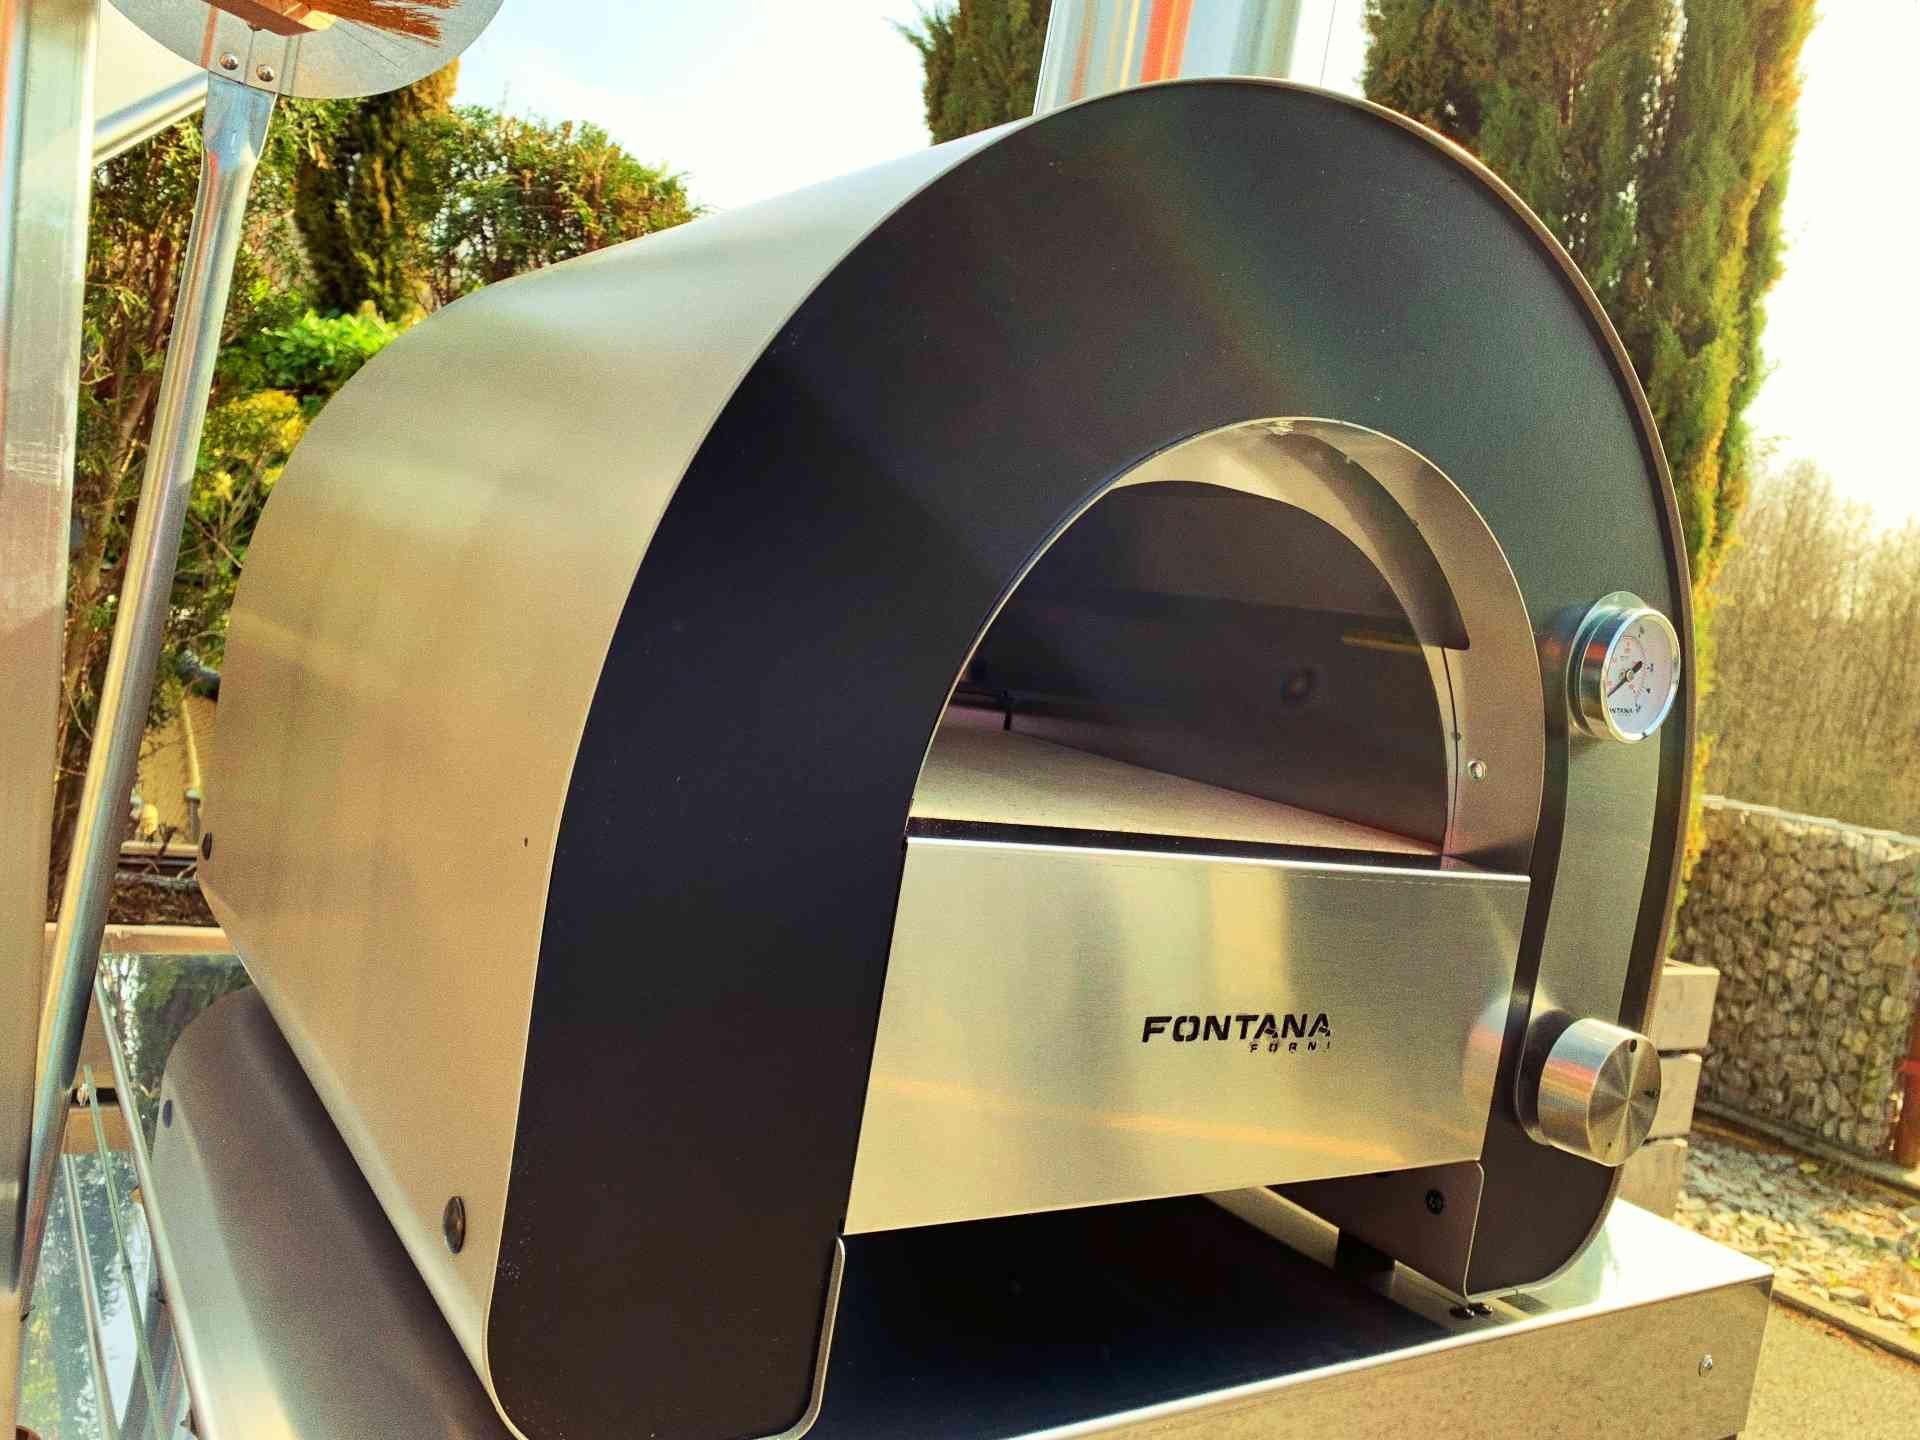 Fontana outdoor kitchen with gas pizza oven Fontana Maestro, 40cm baking surface, 0.75m table width, rollable